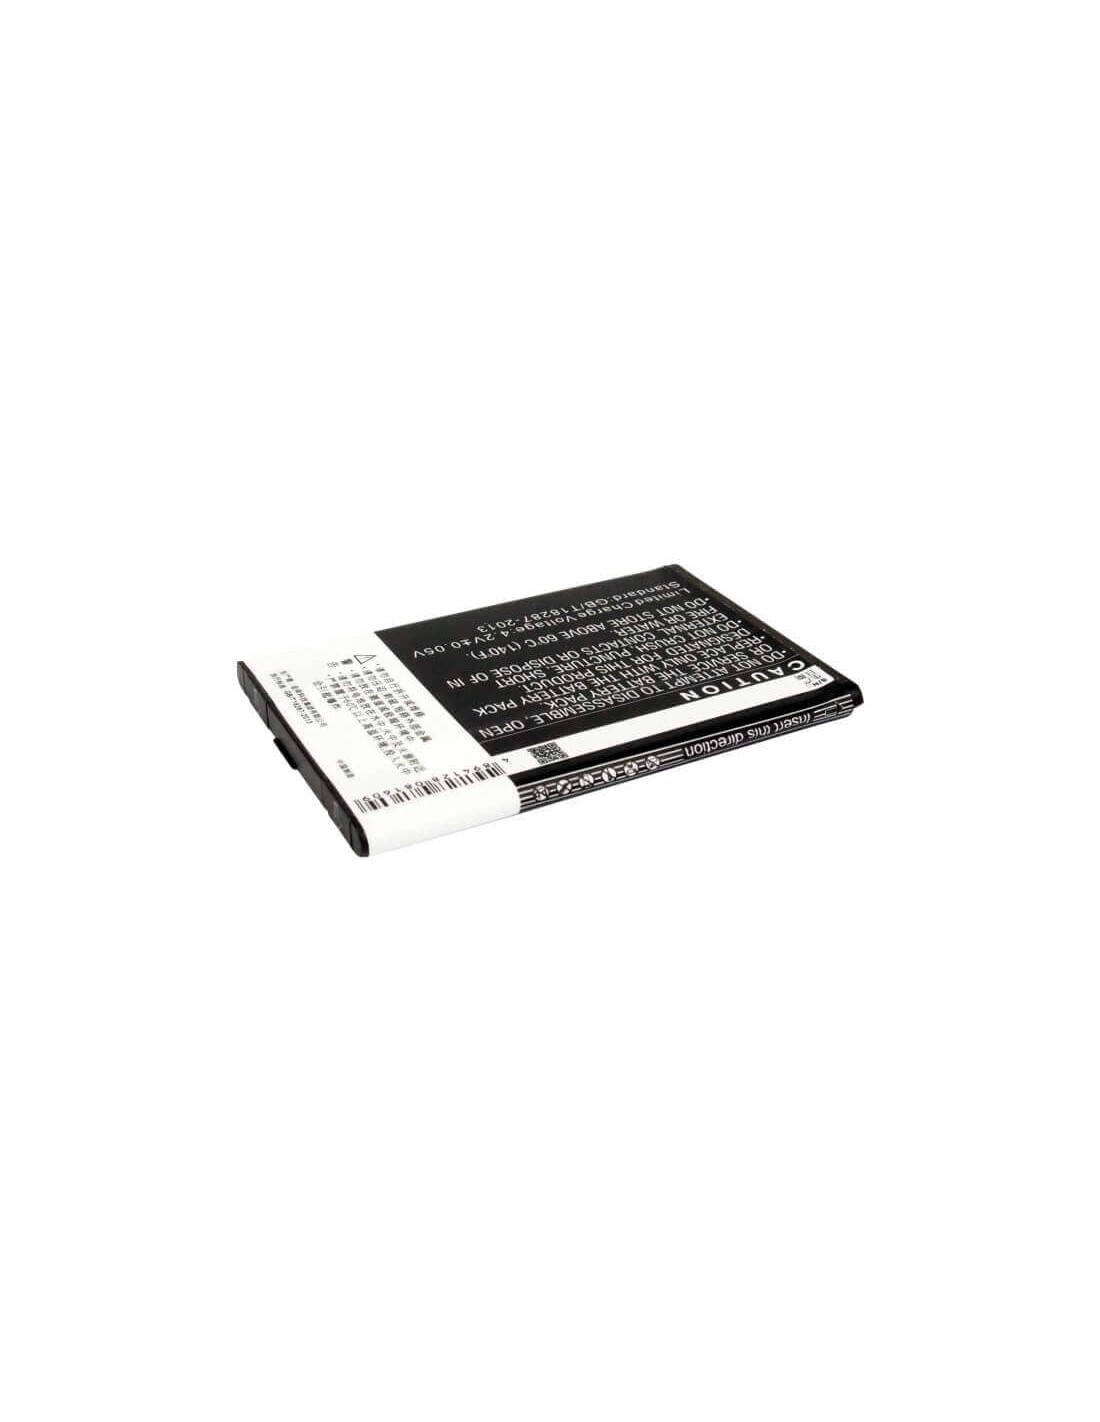 Battery for Acer CloudMobile S500, S500, Cloud Mobile 3.7V, 1460mAh - 5.40Wh